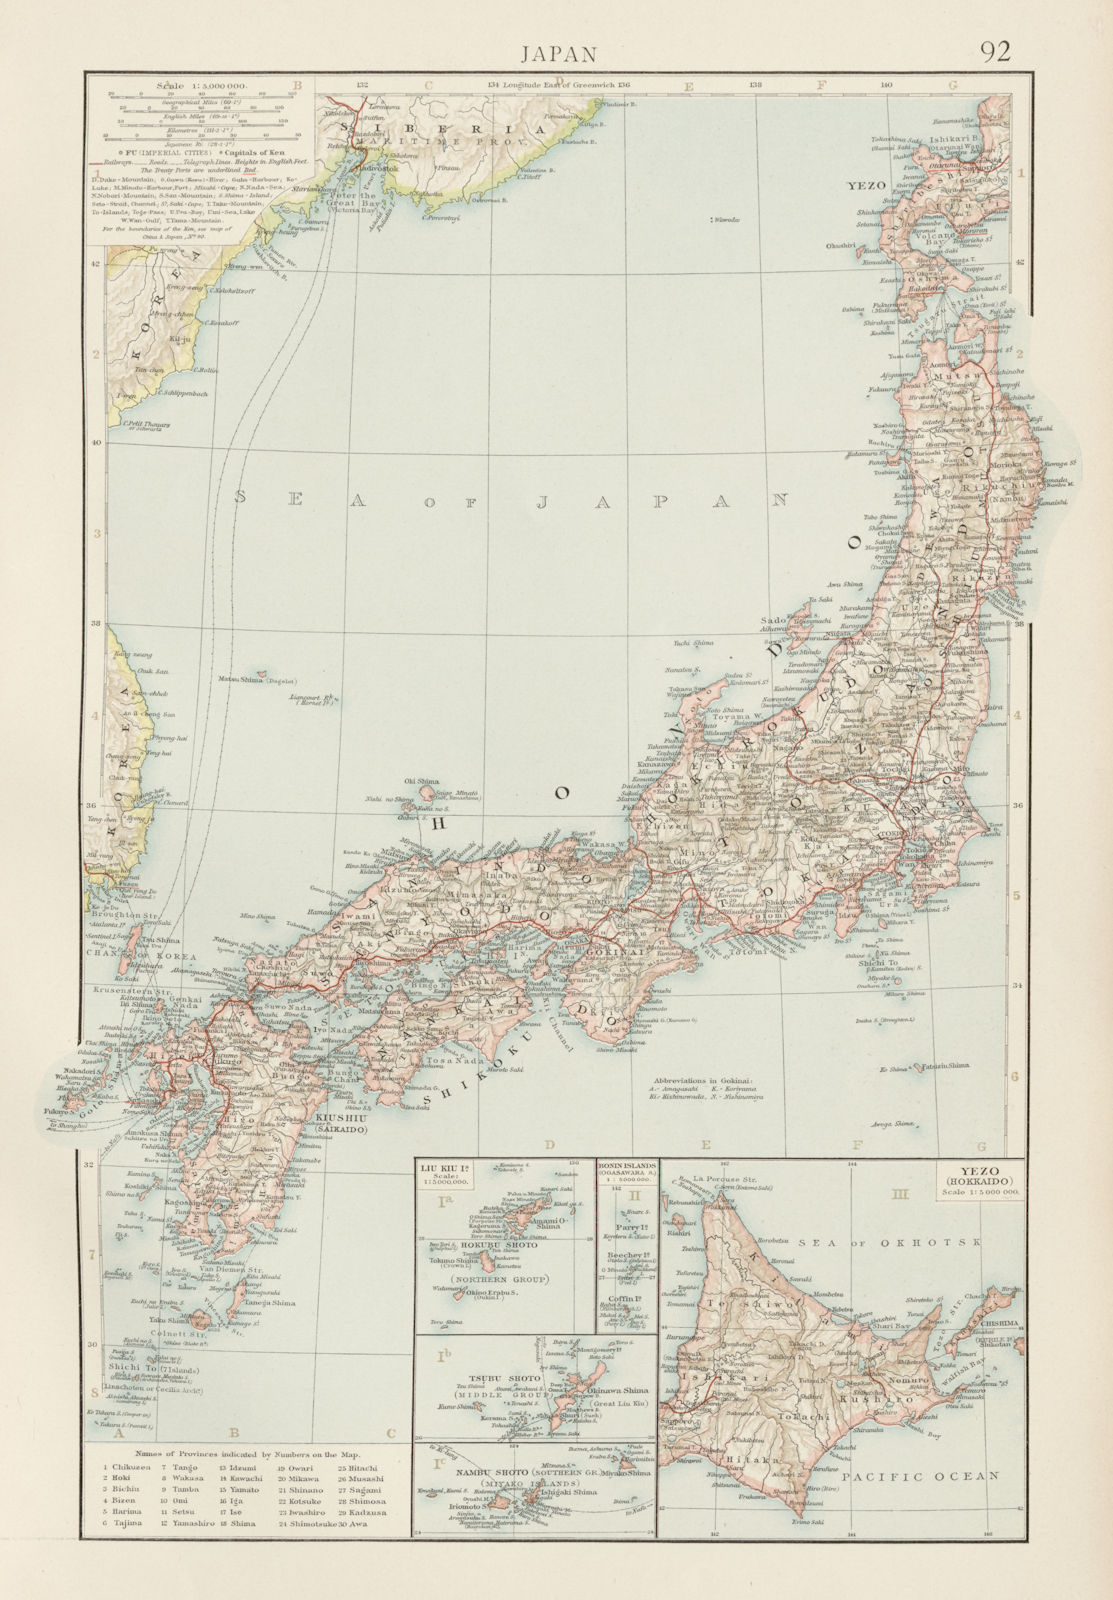 Associate Product Japan showing railways & treaty ports. THE TIMES 1900 old antique map chart